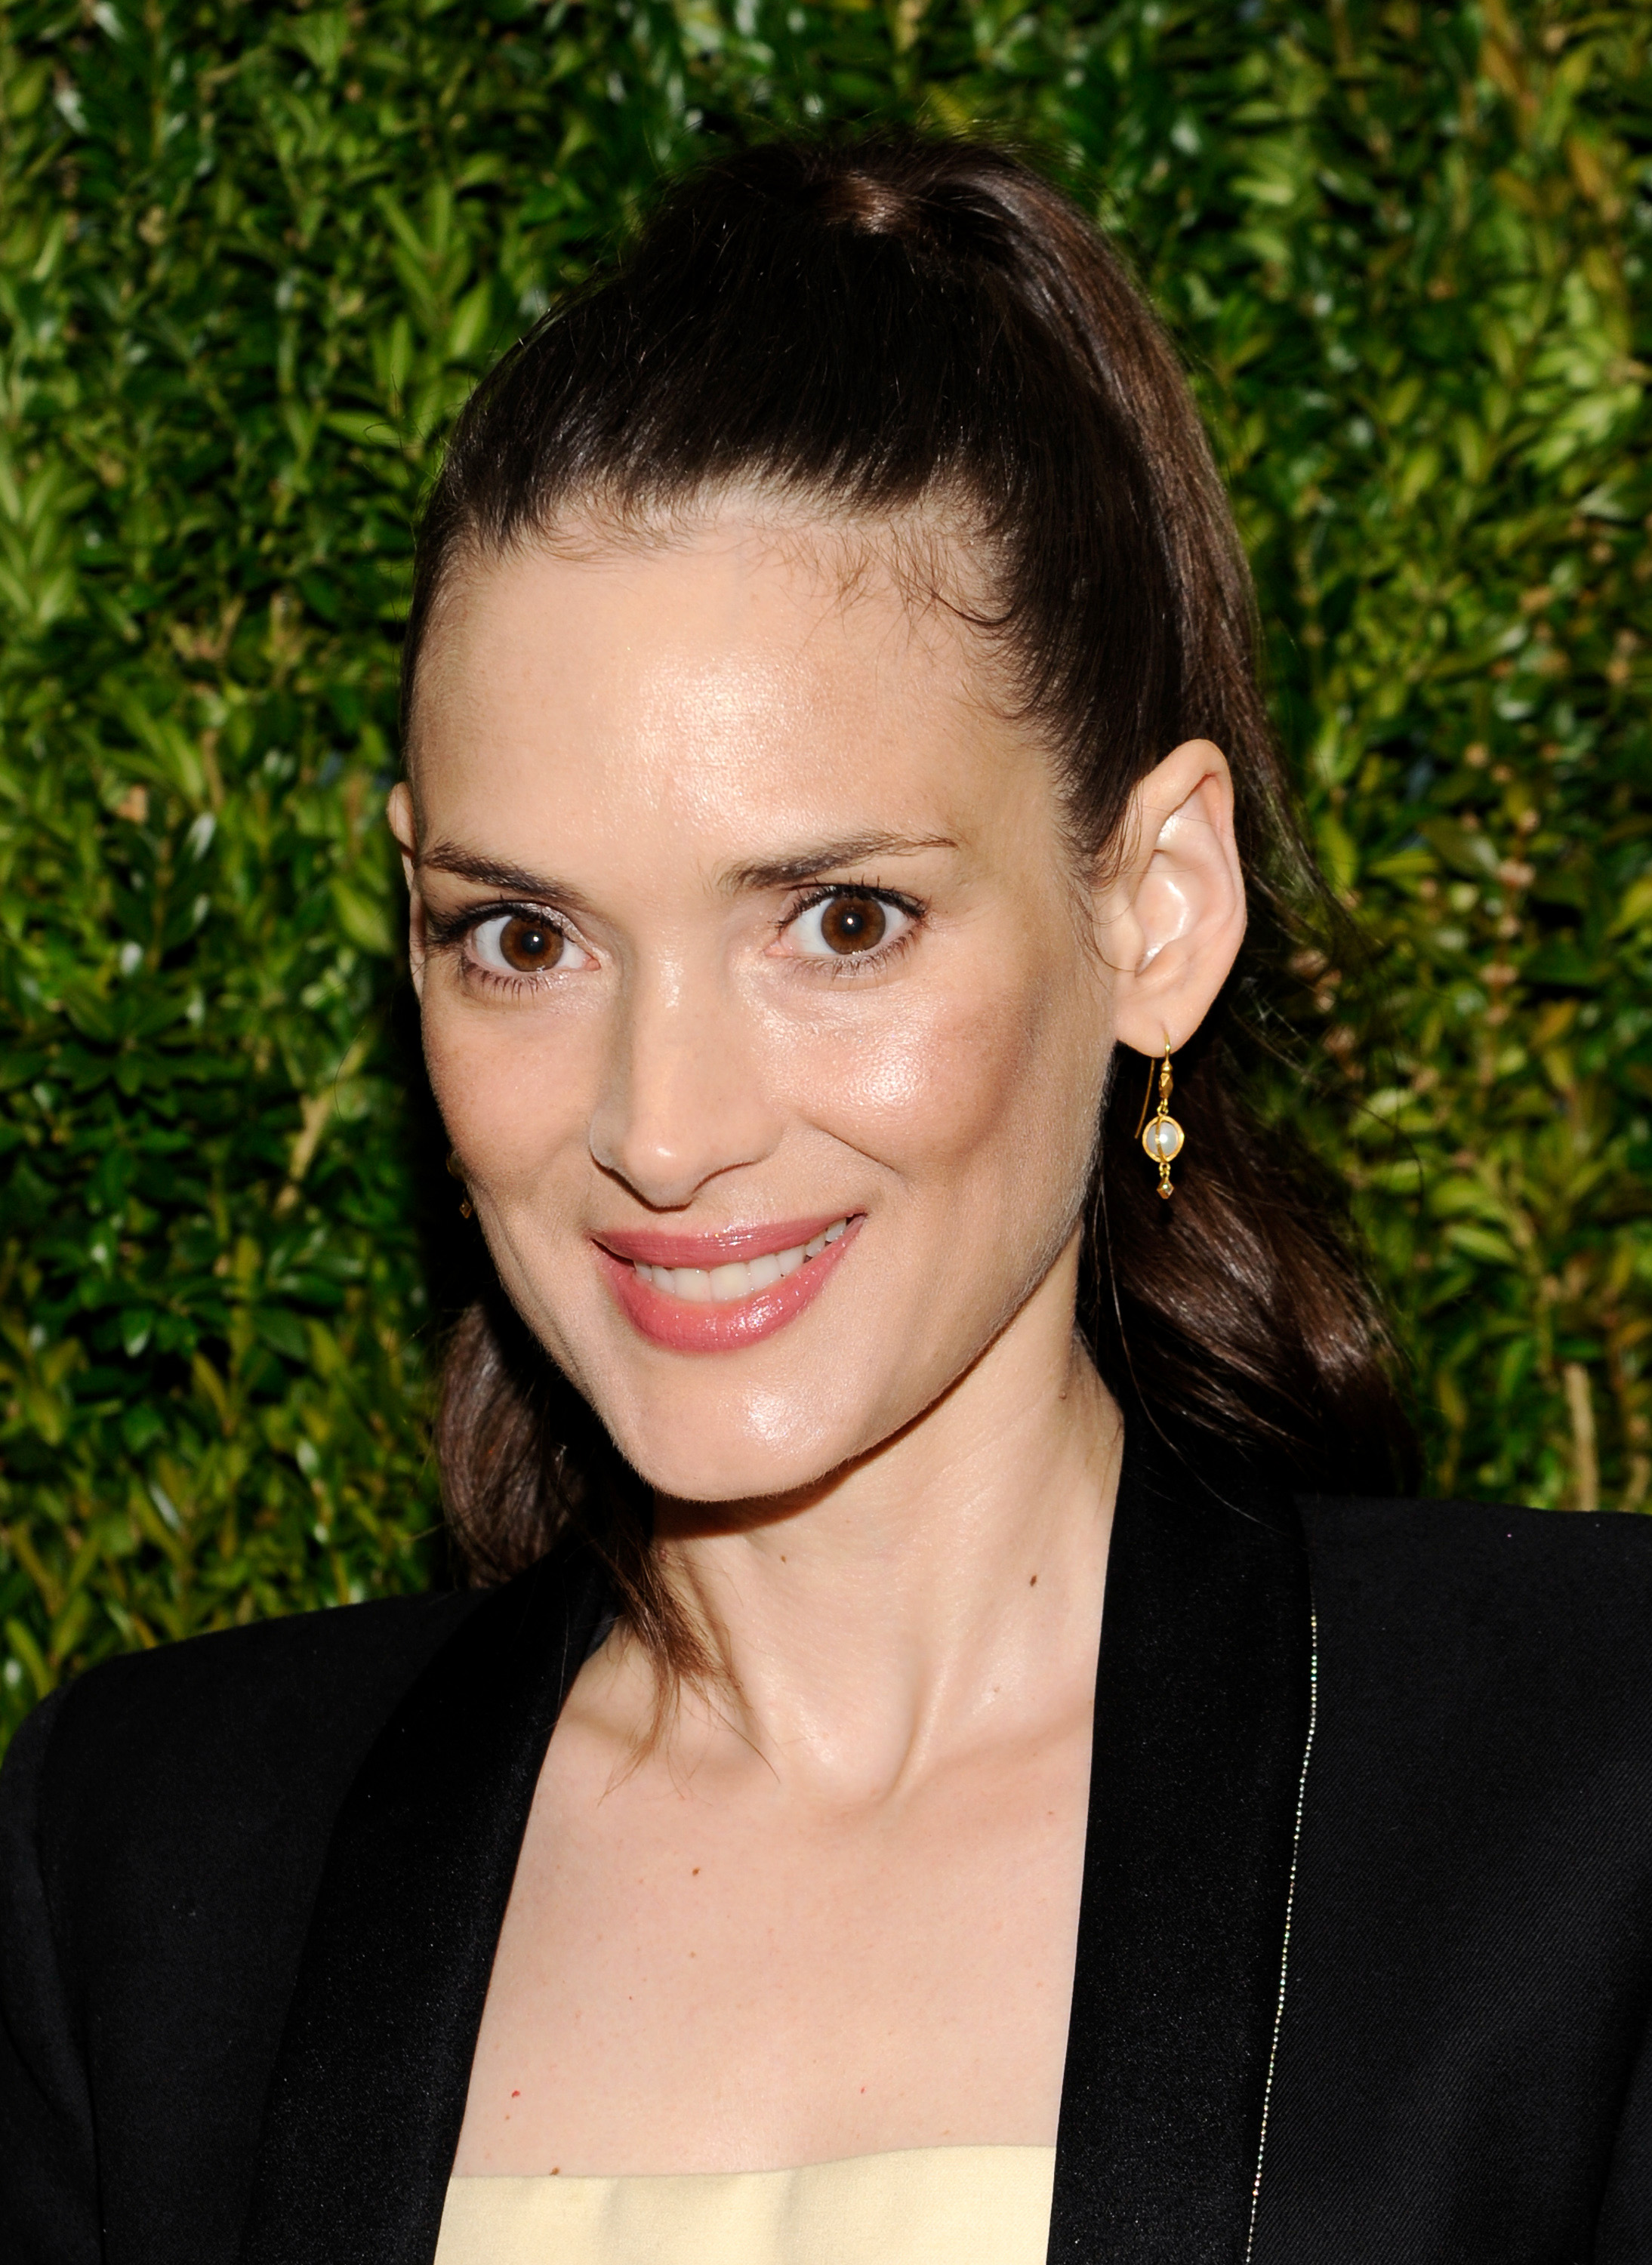 Actress Winona Ryder attends special screening of "Turks and Caicos" hosted by Vogue and The Cinema Society at the Crosby Street Hotel on April 7, 2014, in New York.